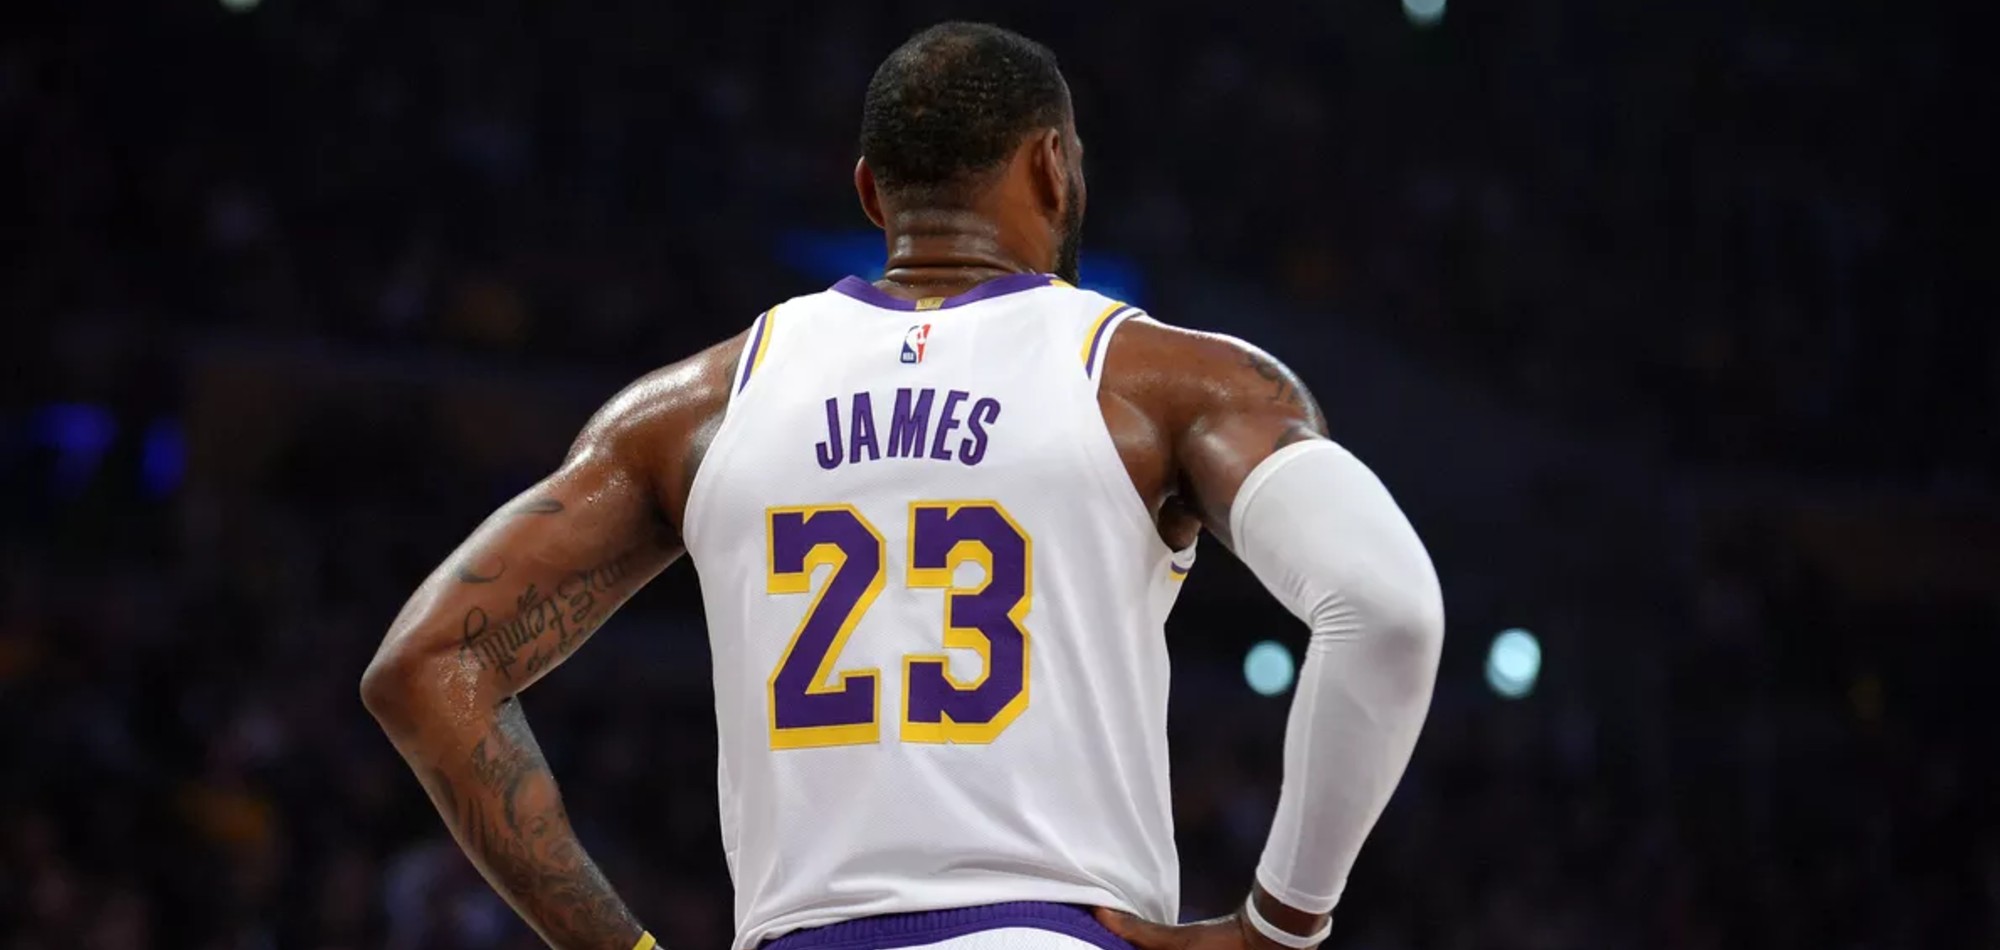 Lakers’ LeBron opts out of wearing social justice message on jersey